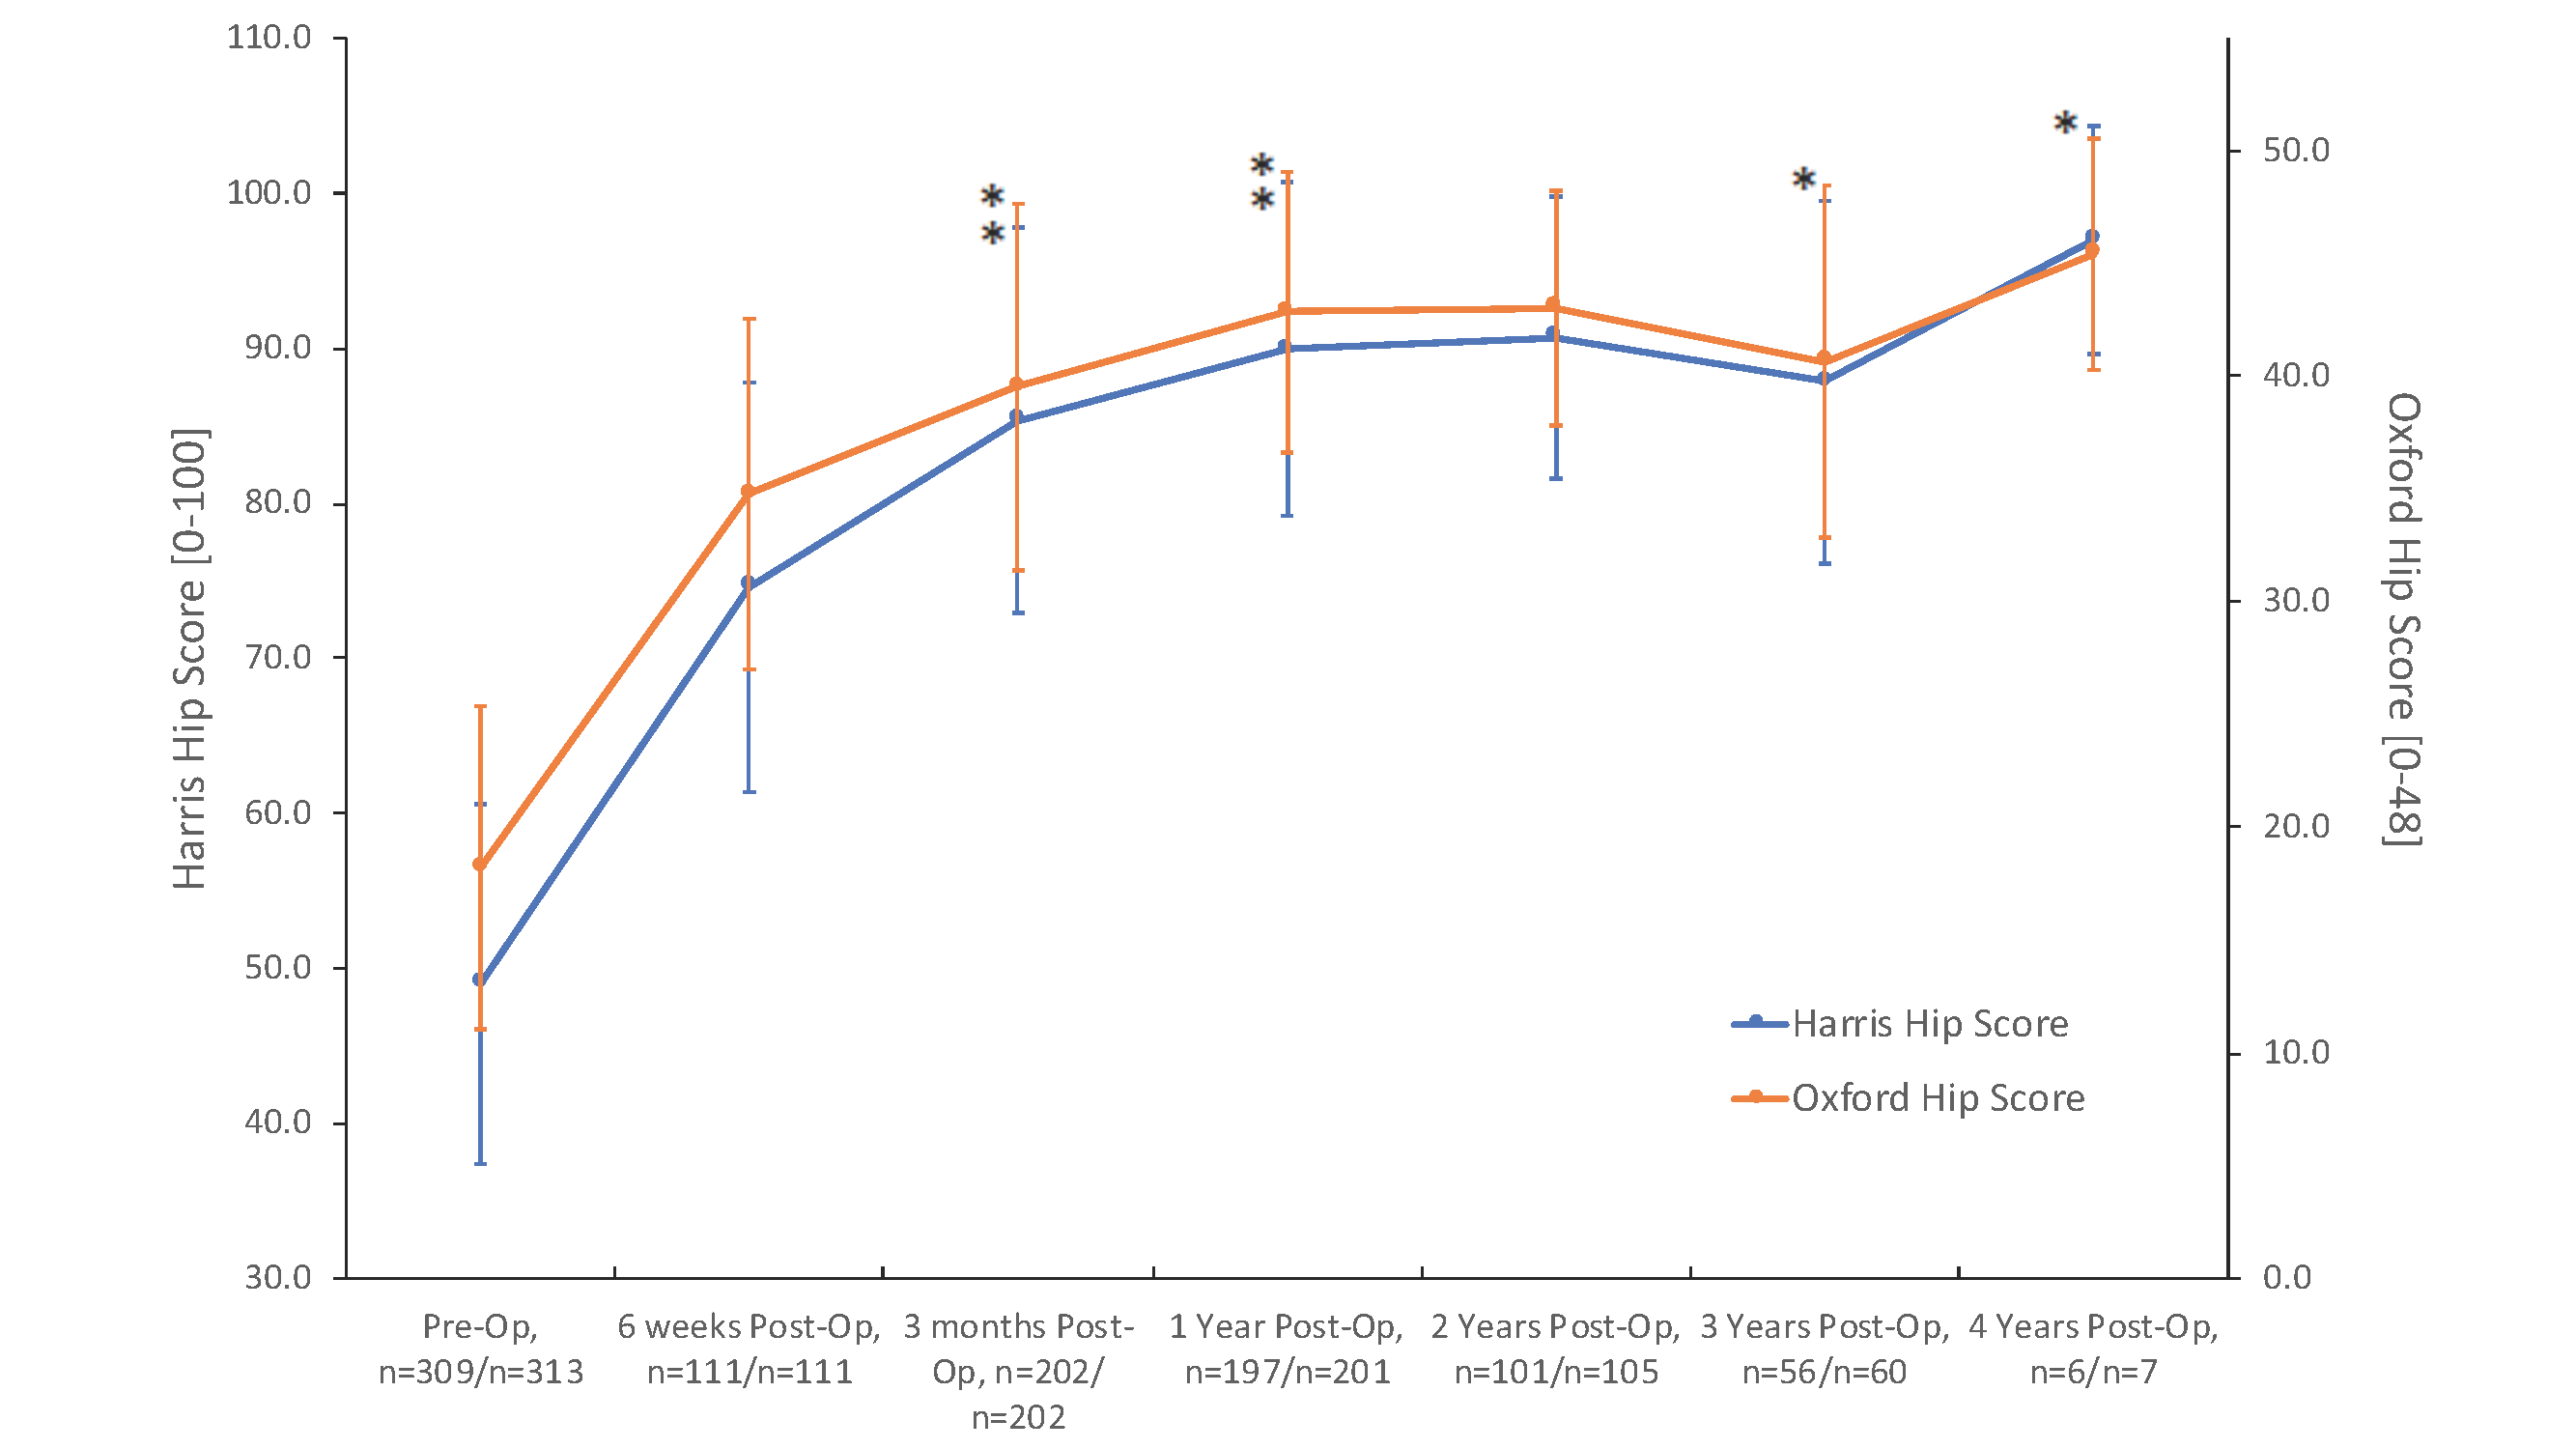 Figure 3. Clinical outcome scores. Data represent means +/- standard deviation. n= HSS count/OHS count. *Indicates significant difference from the previous time point (p,0.05).